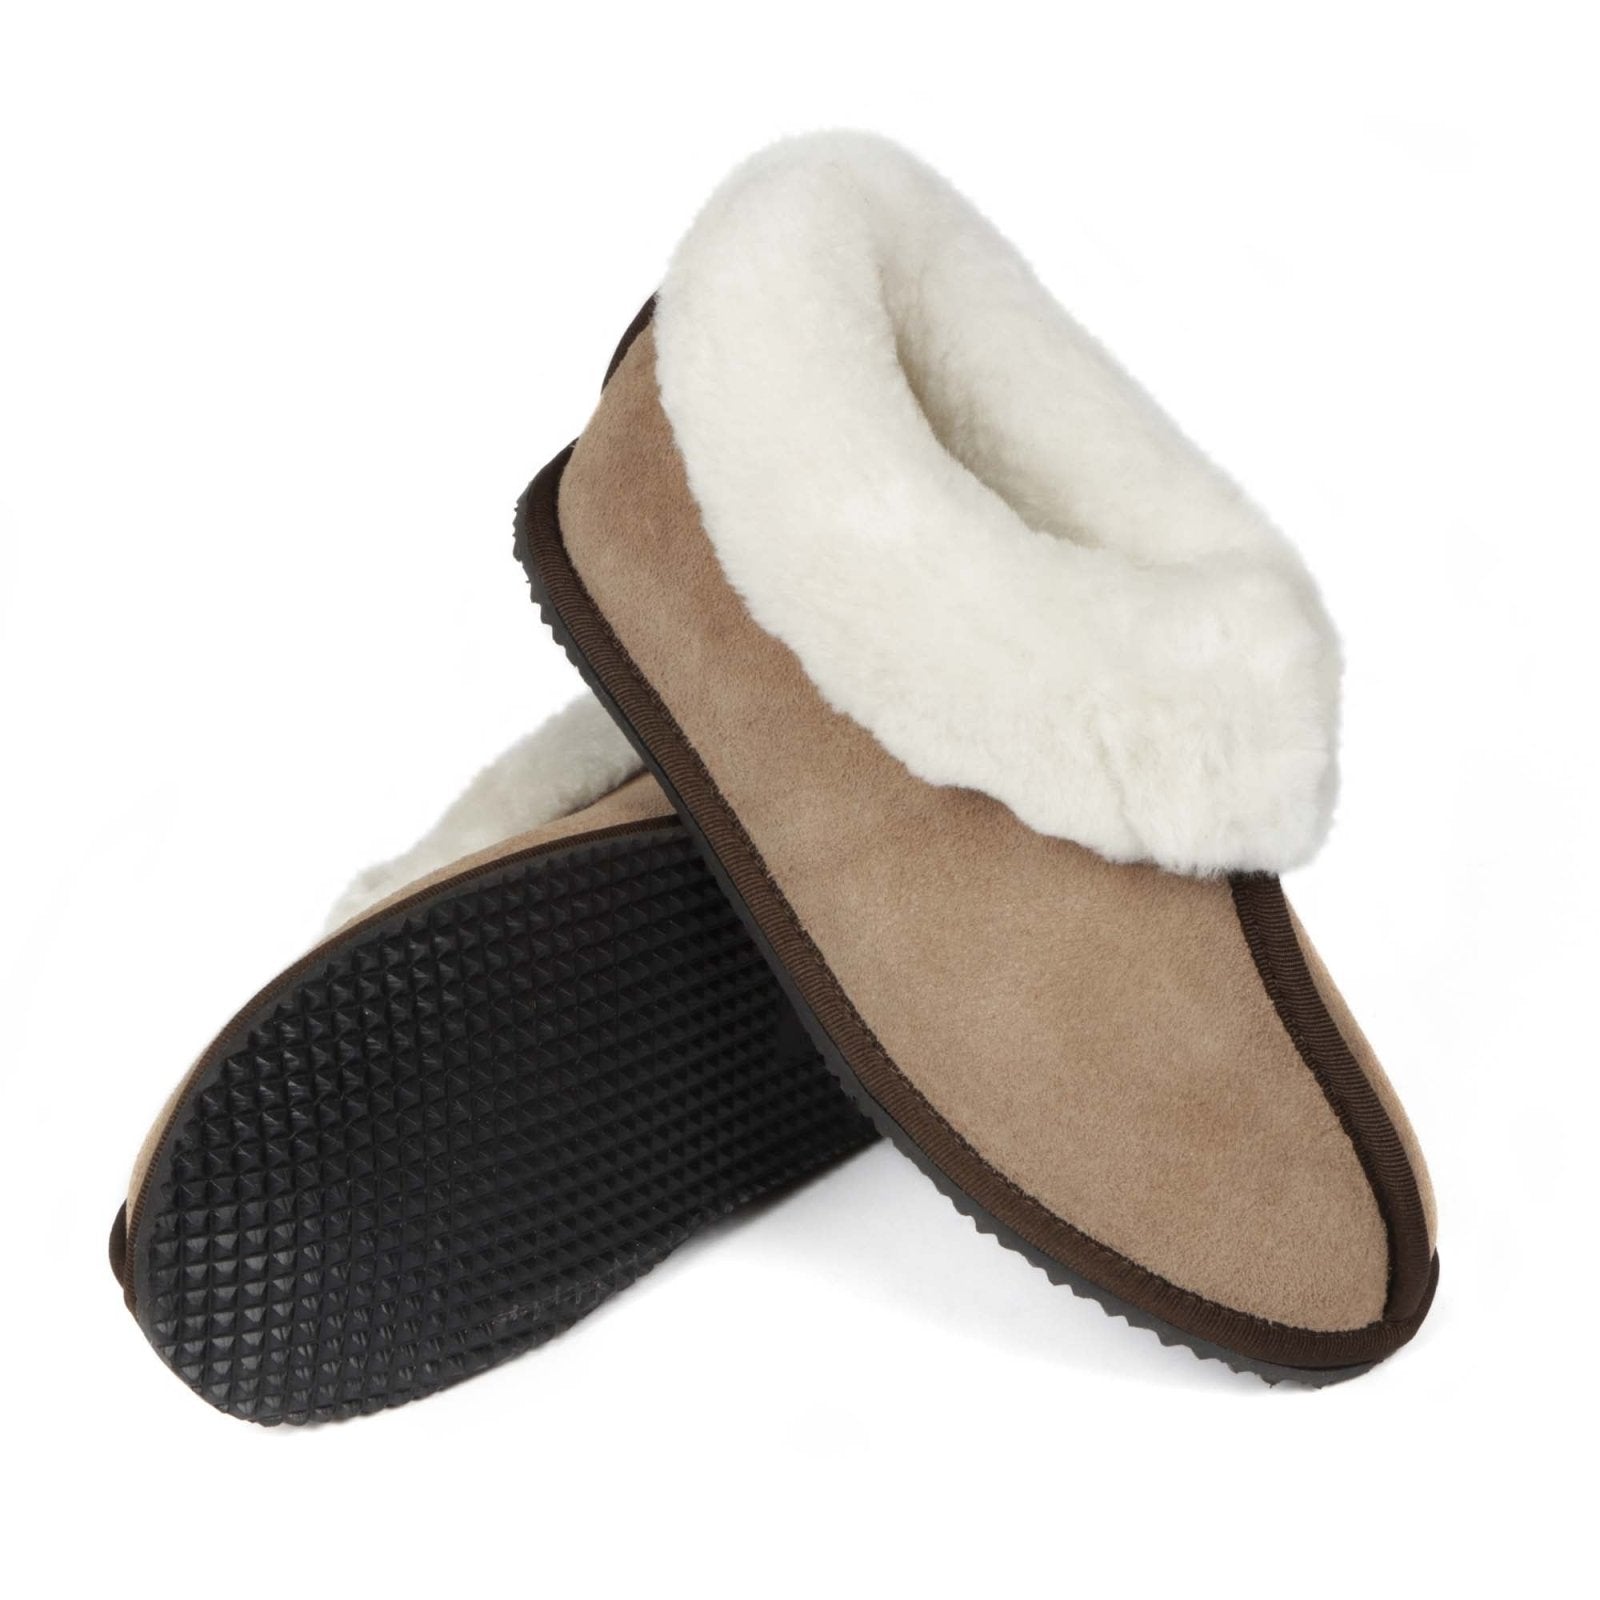 Sneeubok Ladies Premium Suede Woolen Slippers - Khaki - Freestyle SA Proudly local leather boots veldskoens vellies leather shoes suede veldskoens